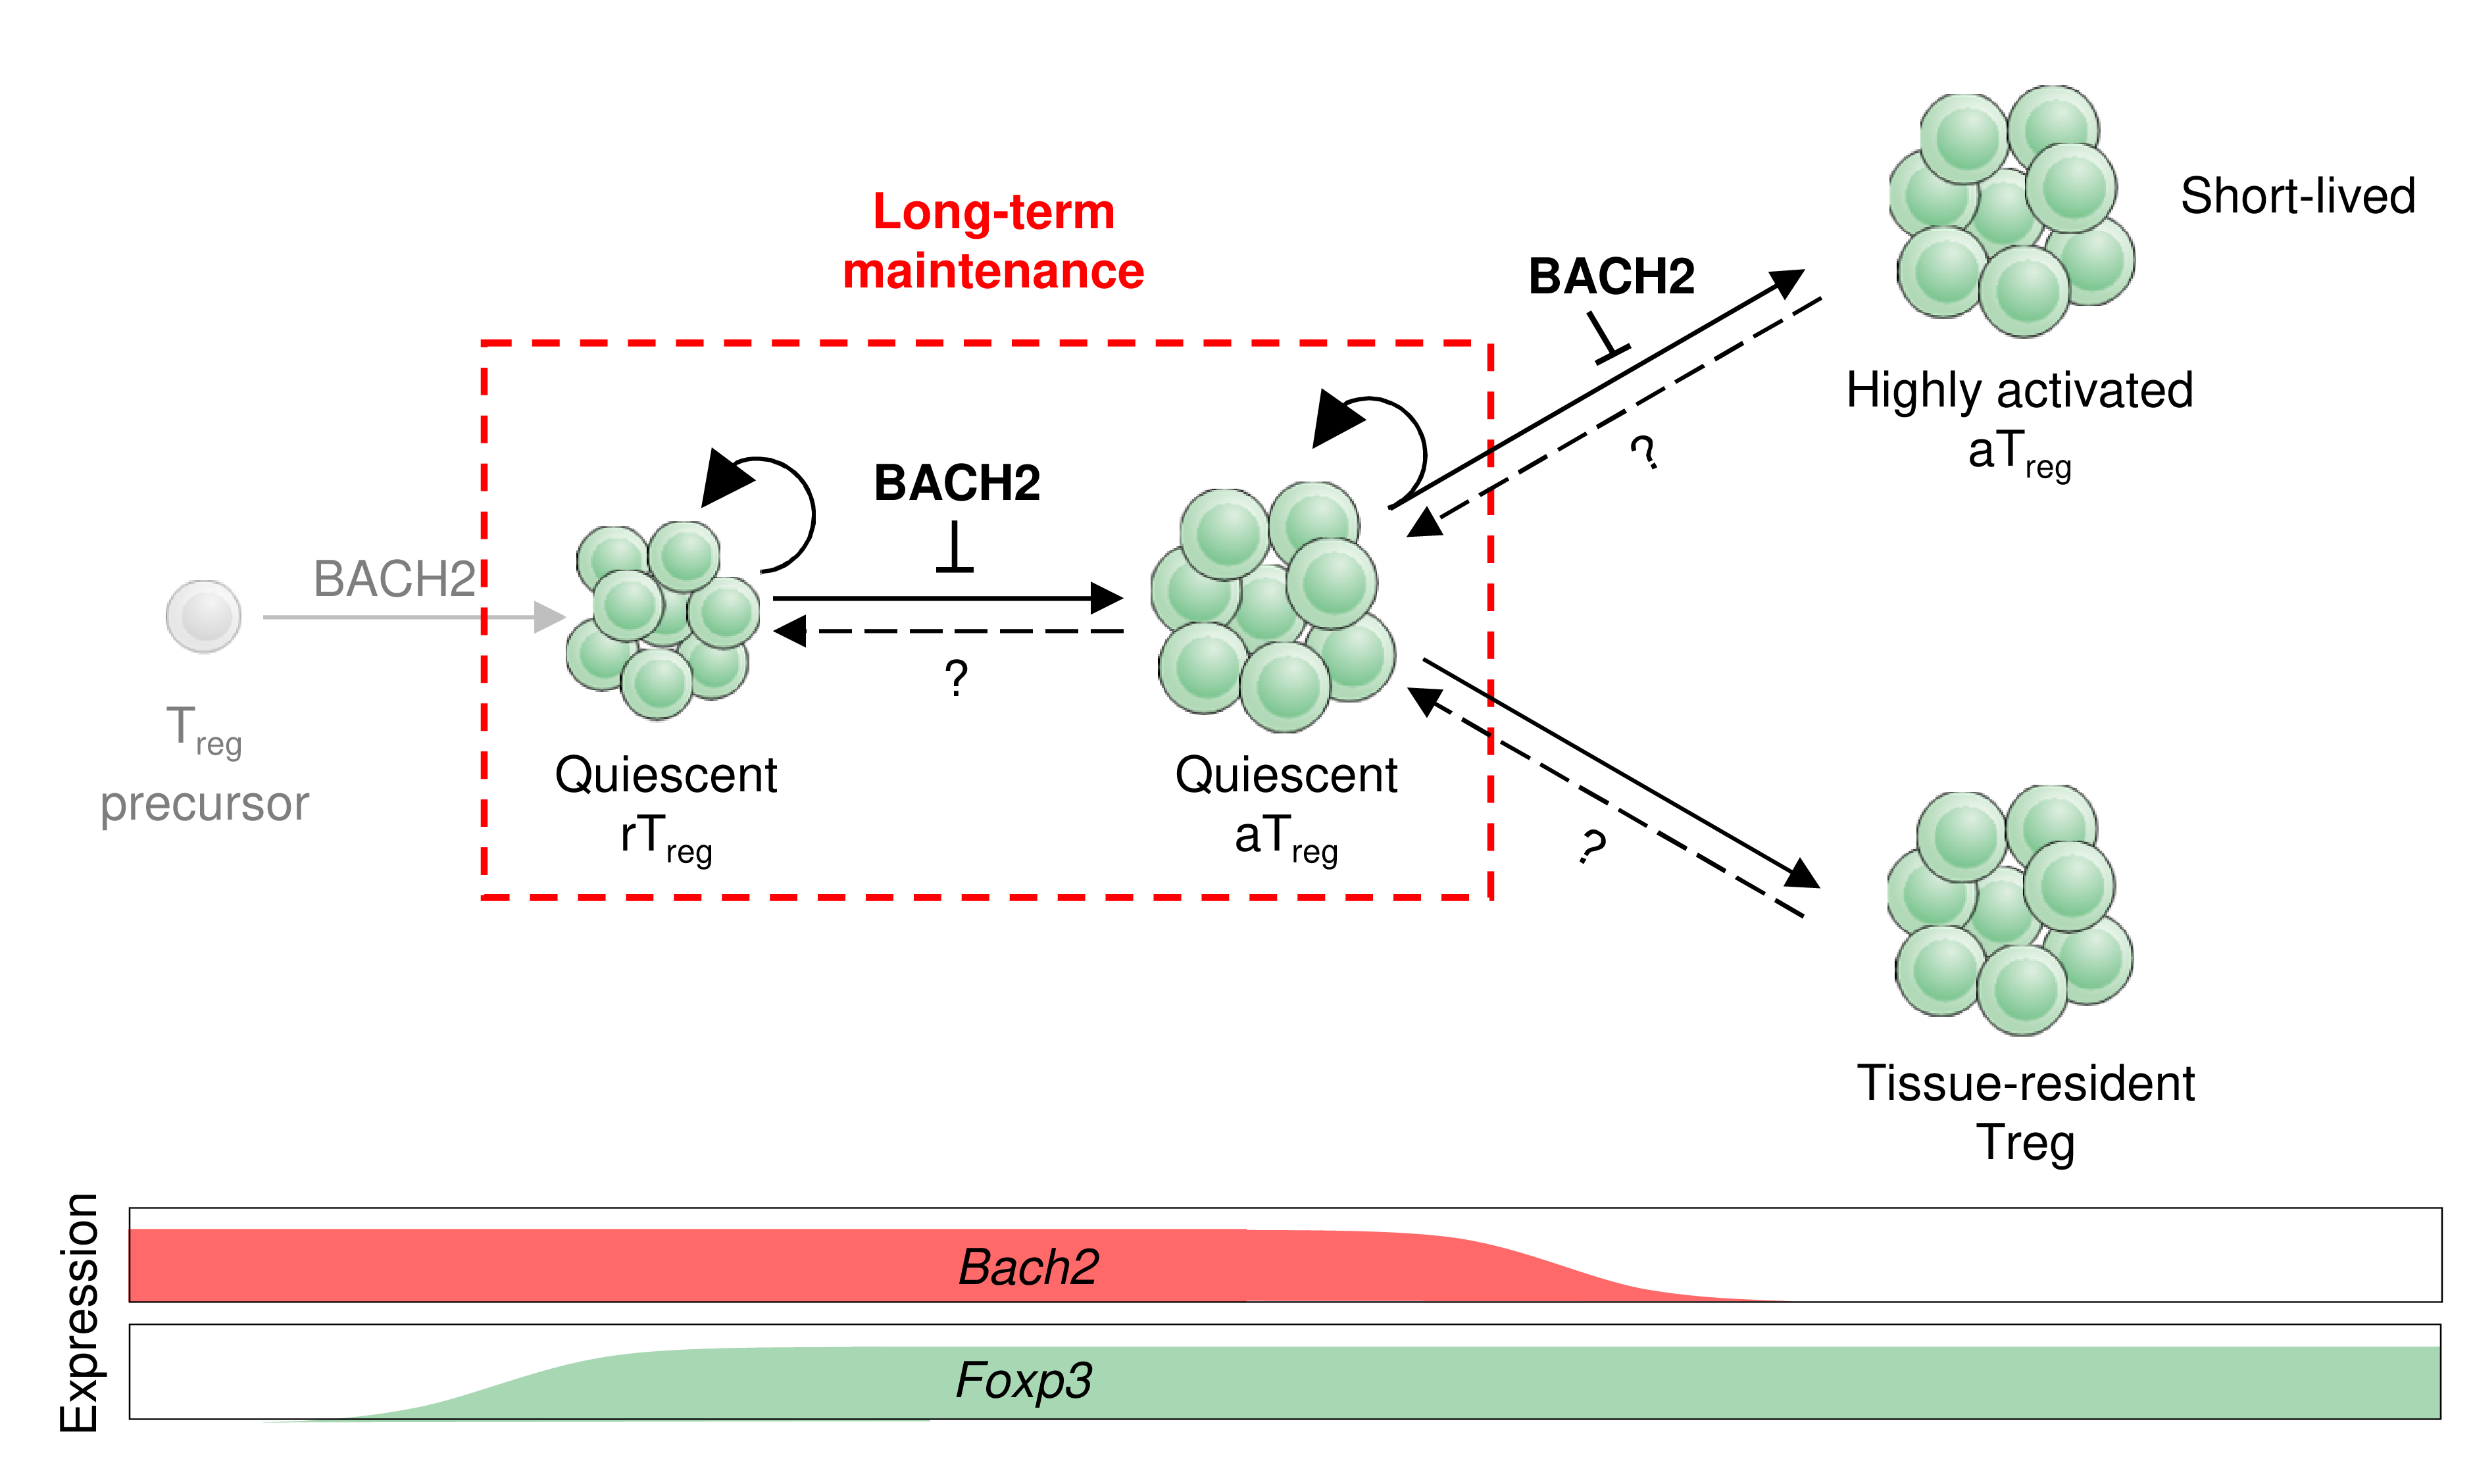 Functions of Bach2 in Treg development and maintenance.